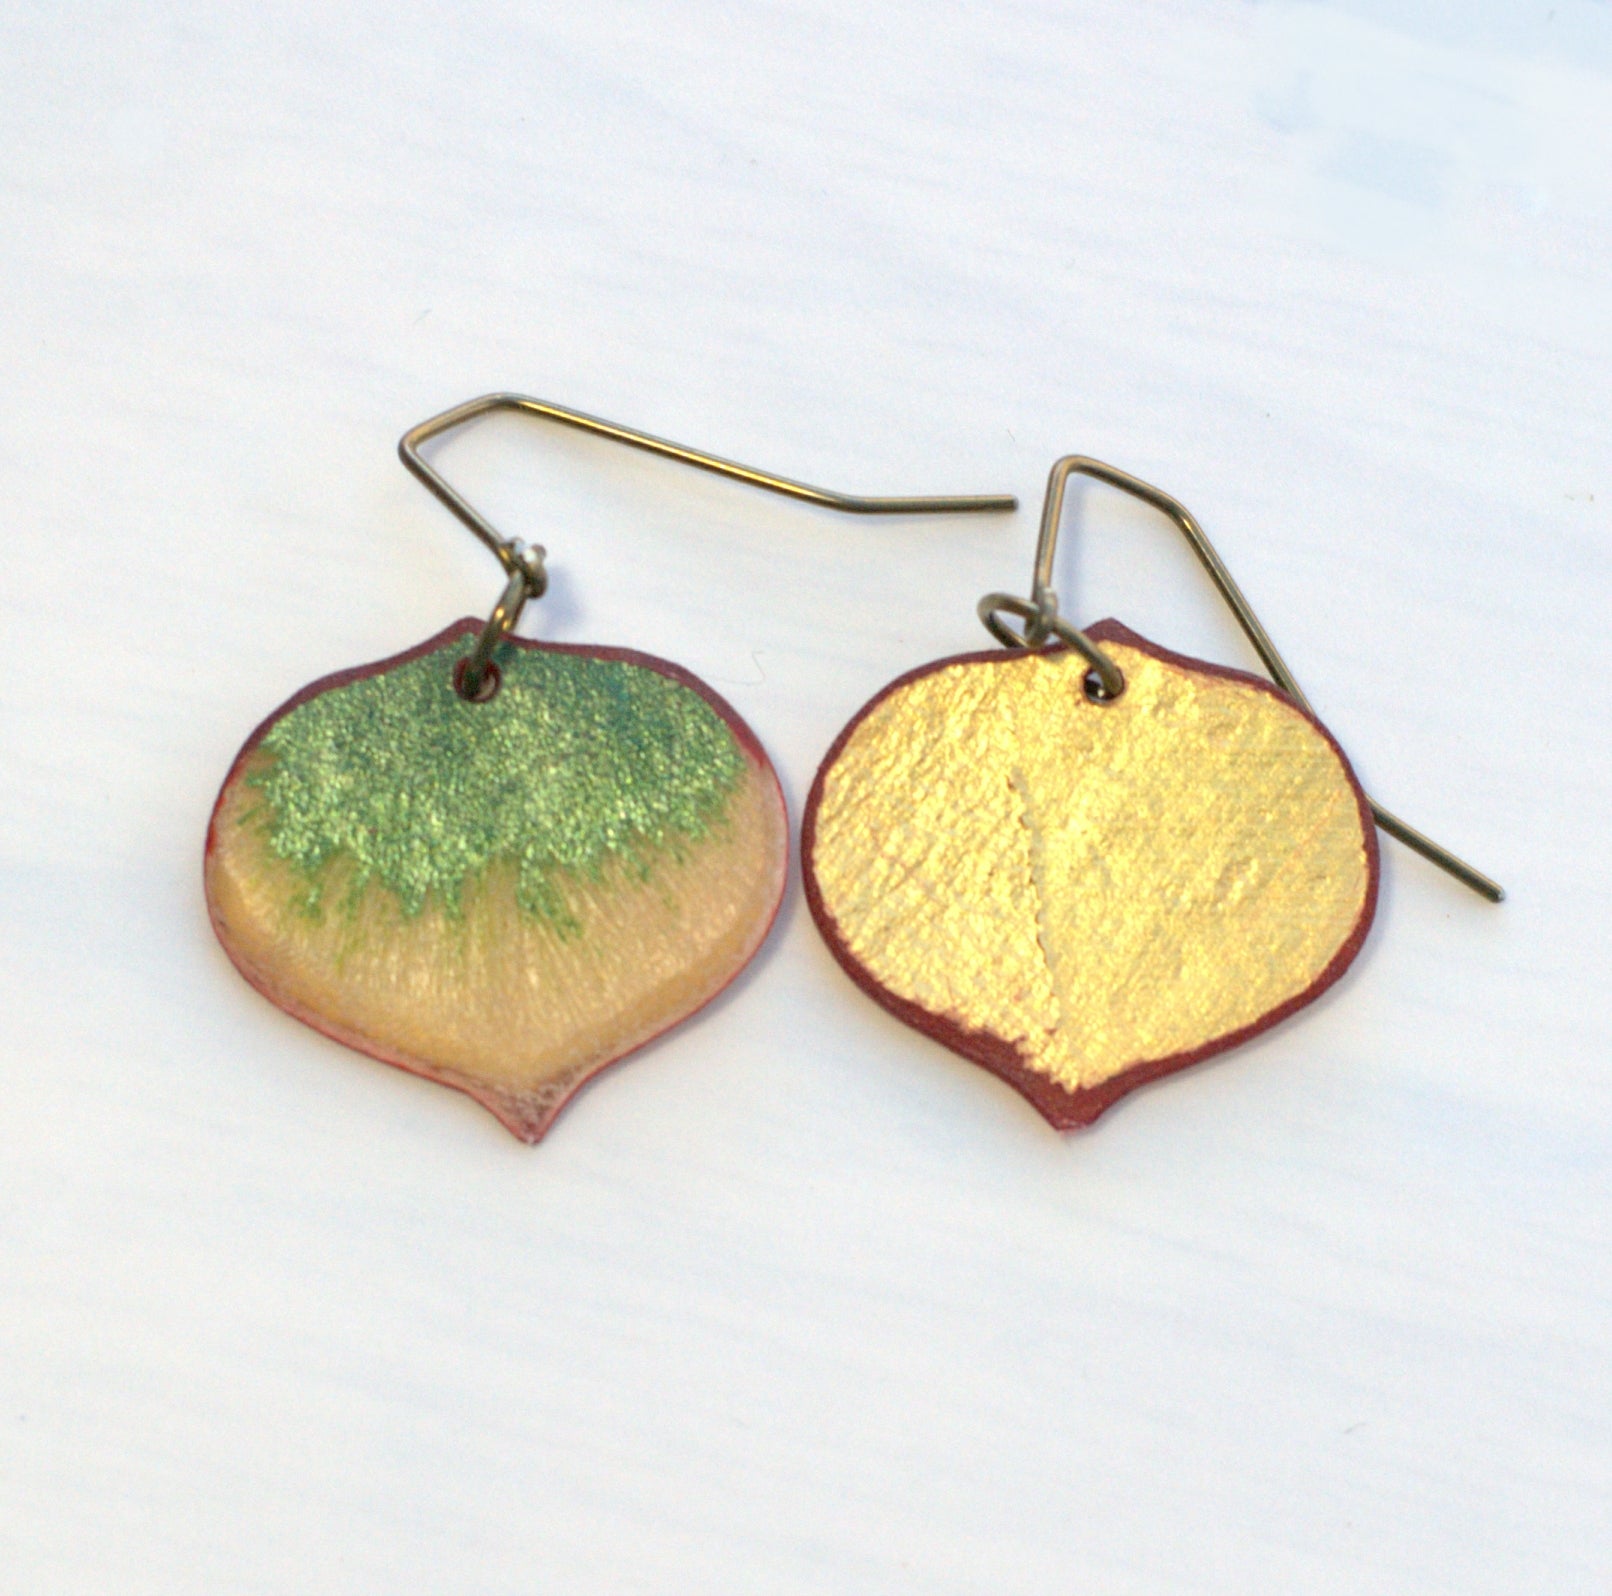 Front and back of small green Aspen leaf earrings